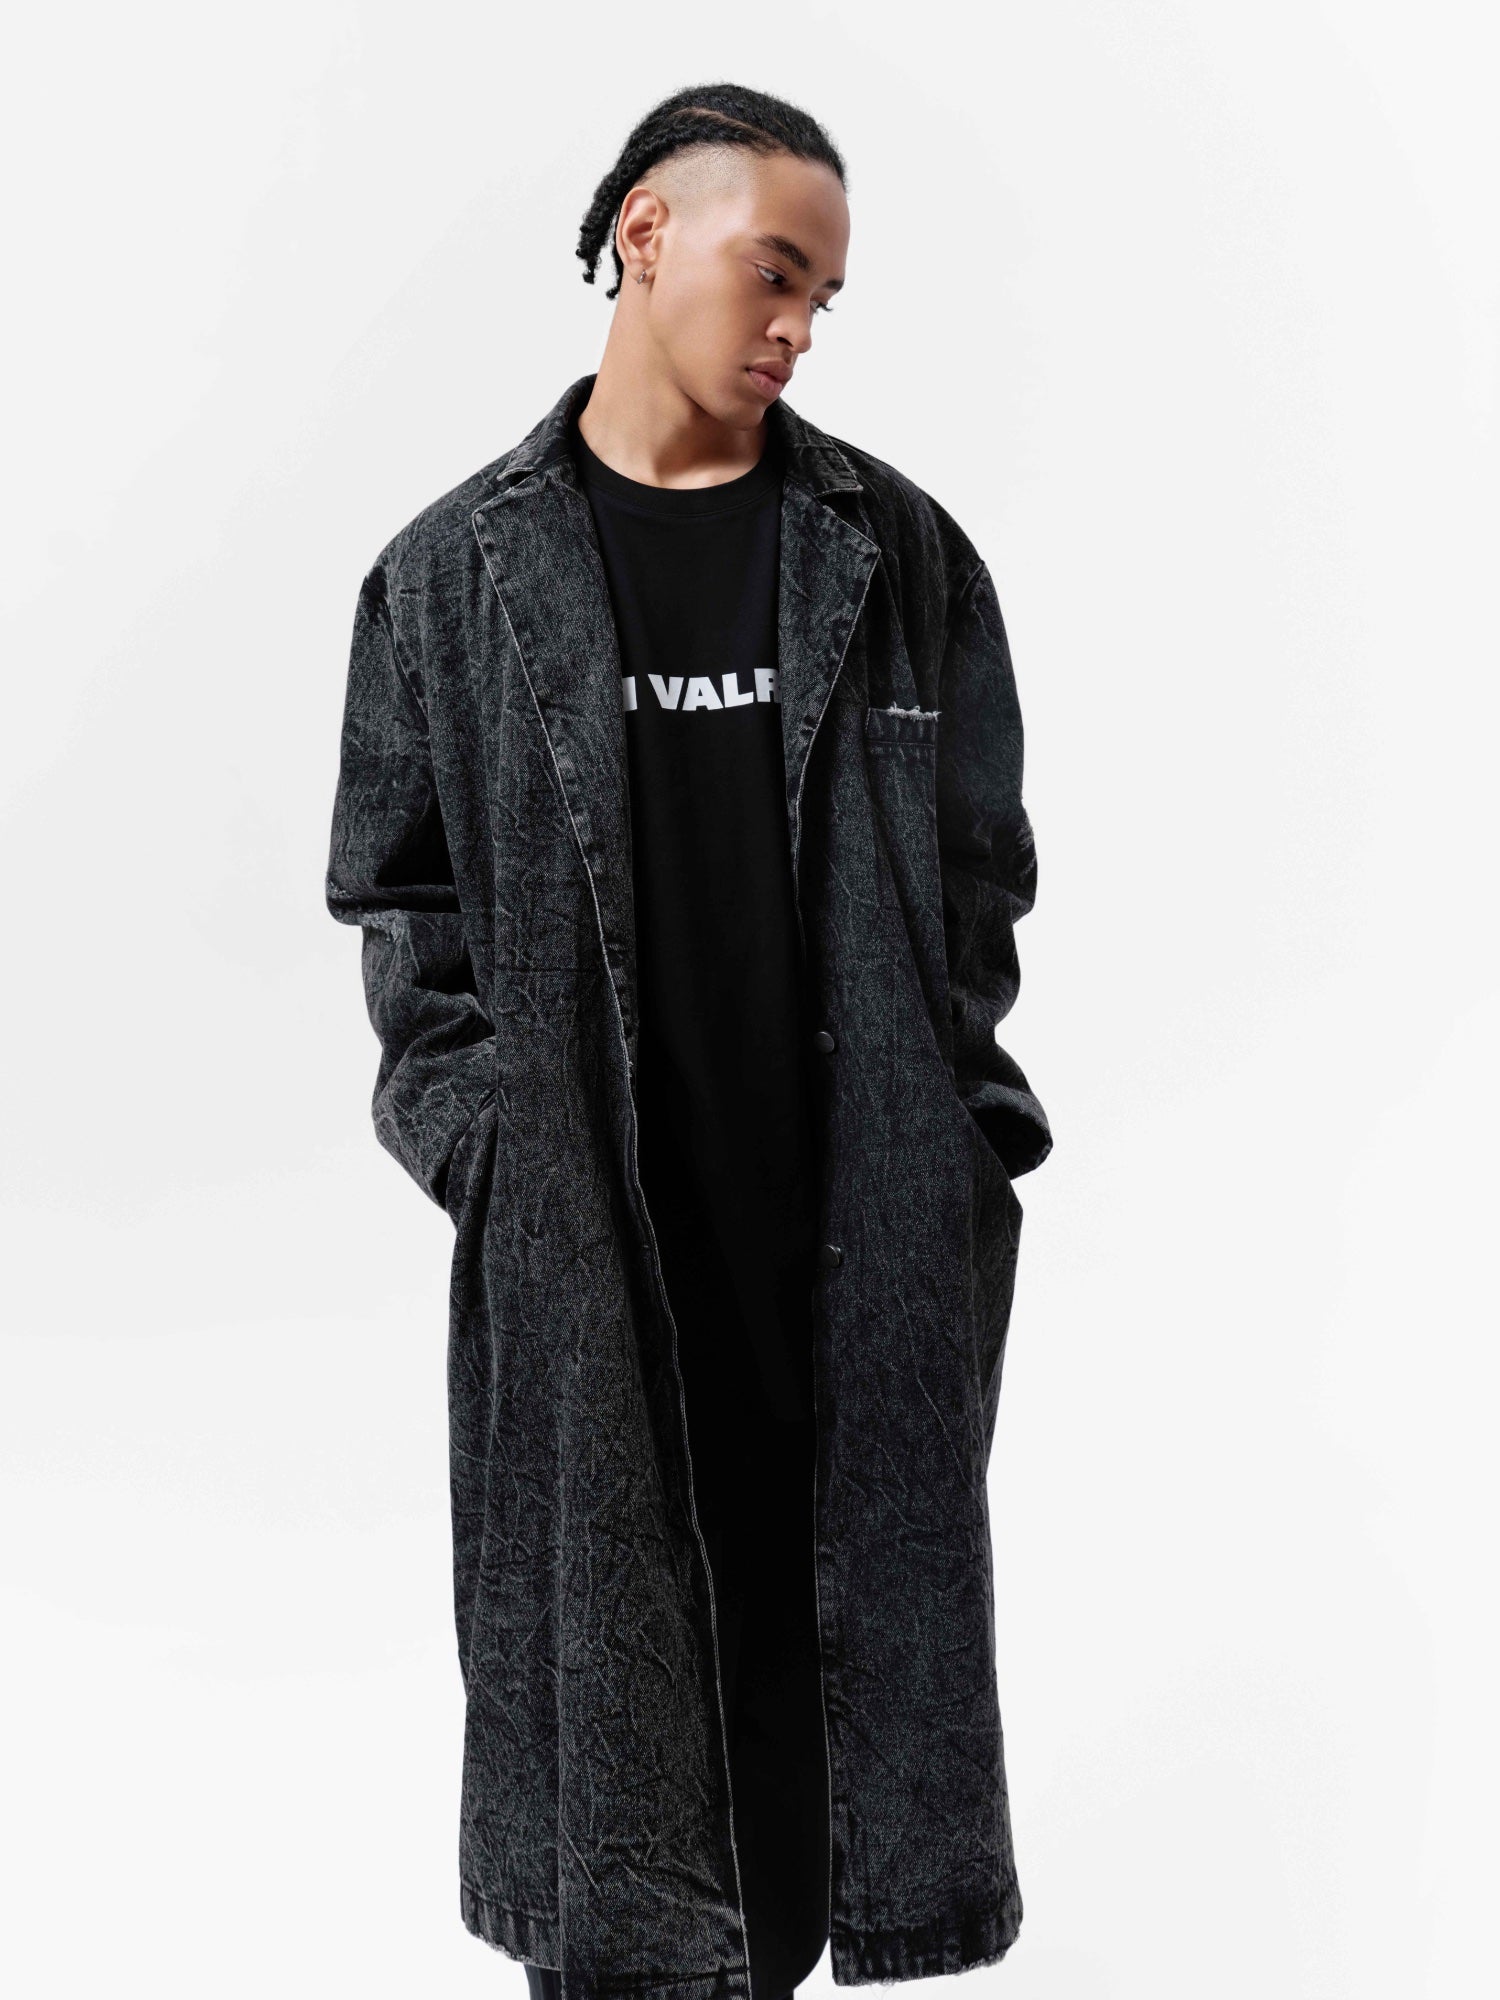 VANN VALRENCÉ Washing Grey Jeans Trench Coat | MADA IN CHINA